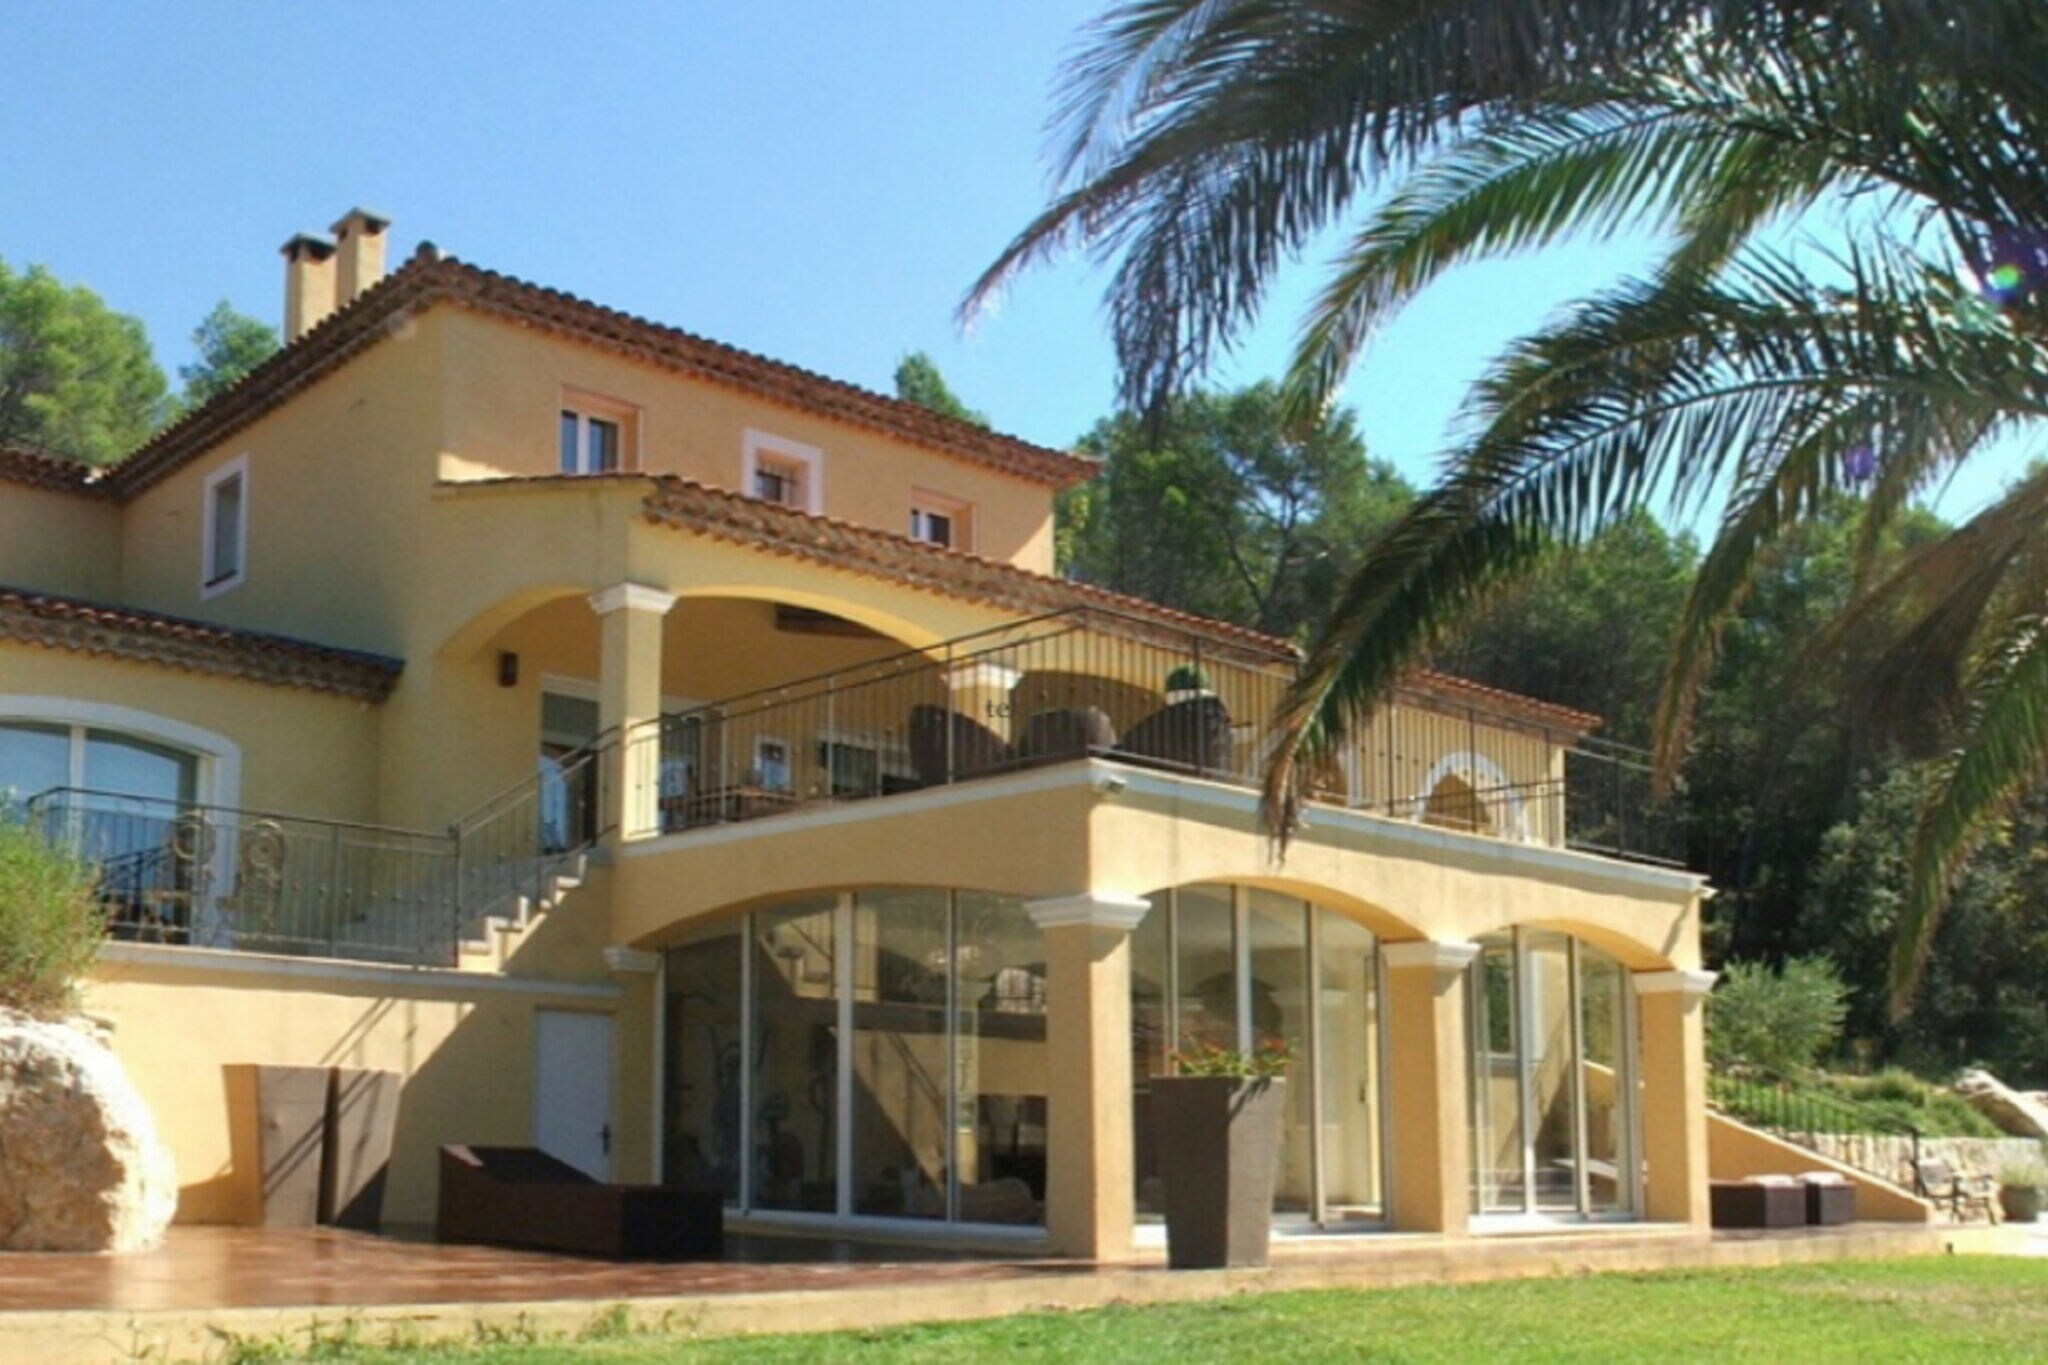 Exclusive villa in Lorgues with private pool and tennis court